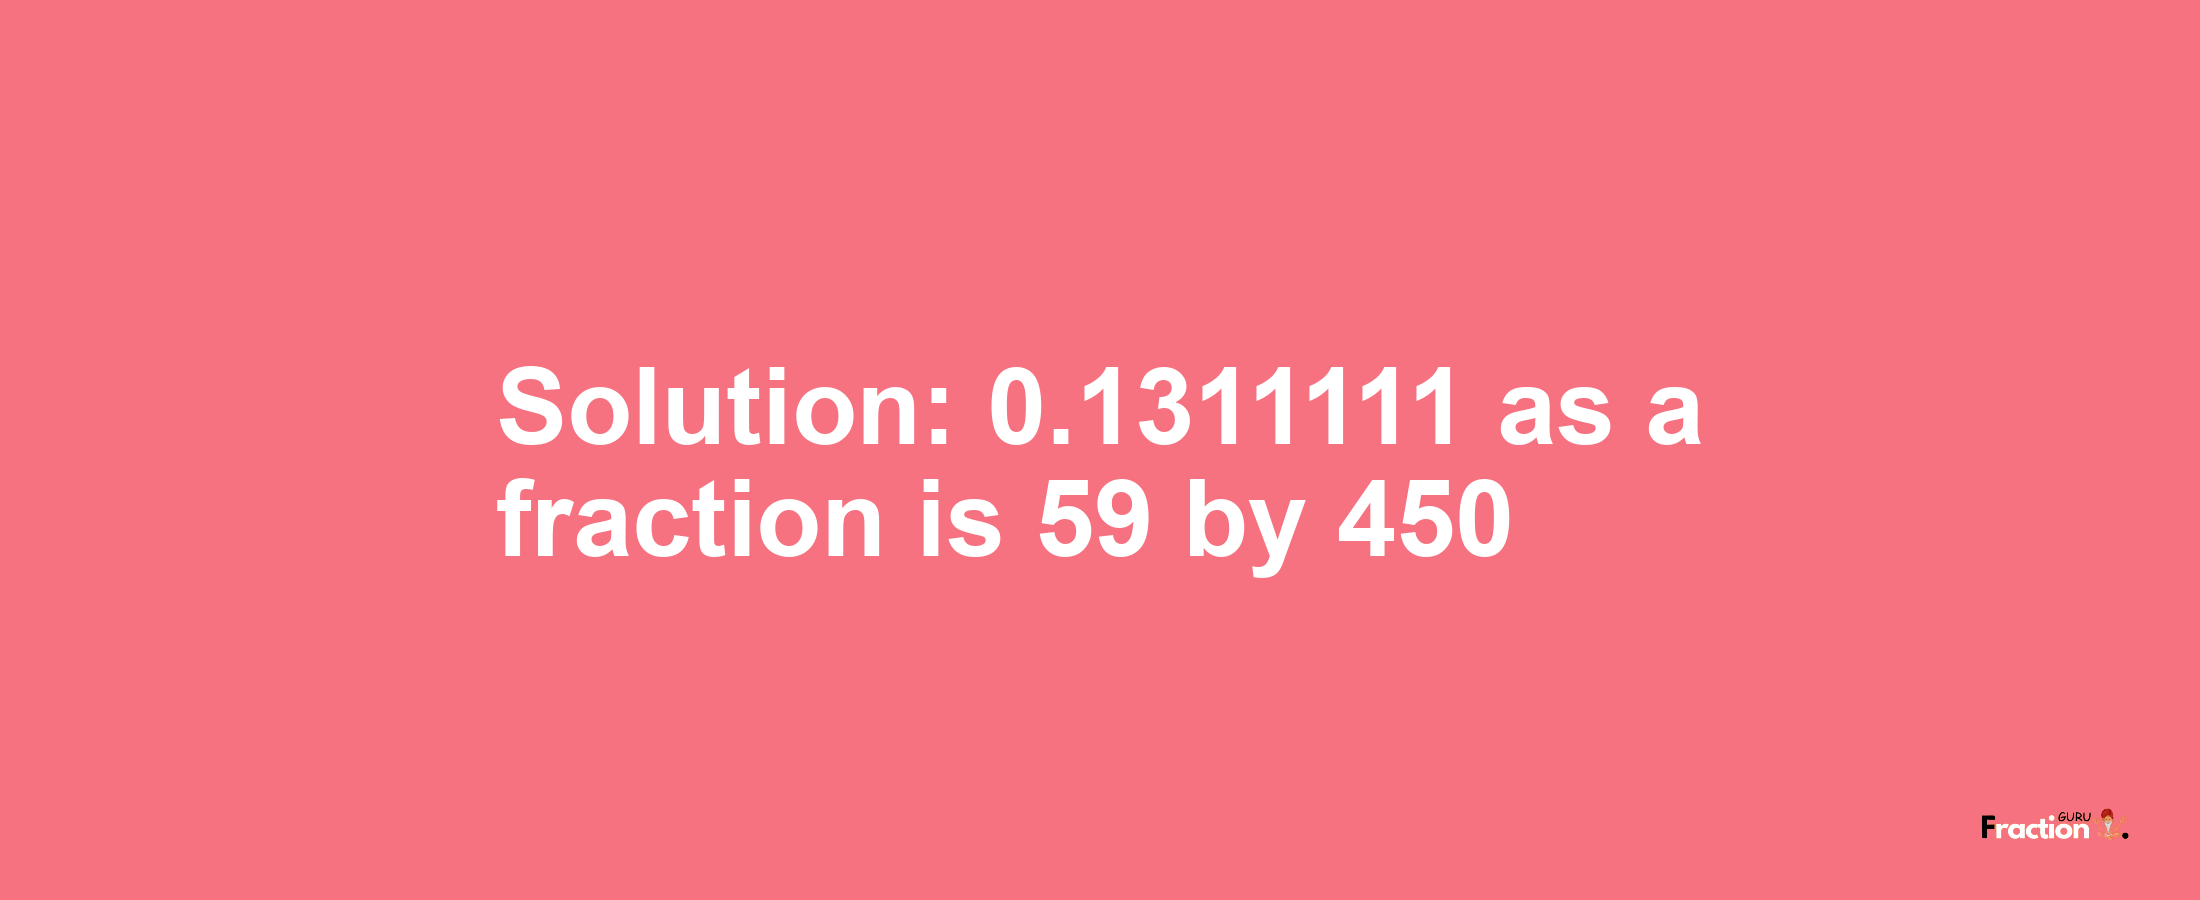 Solution:0.1311111 as a fraction is 59/450